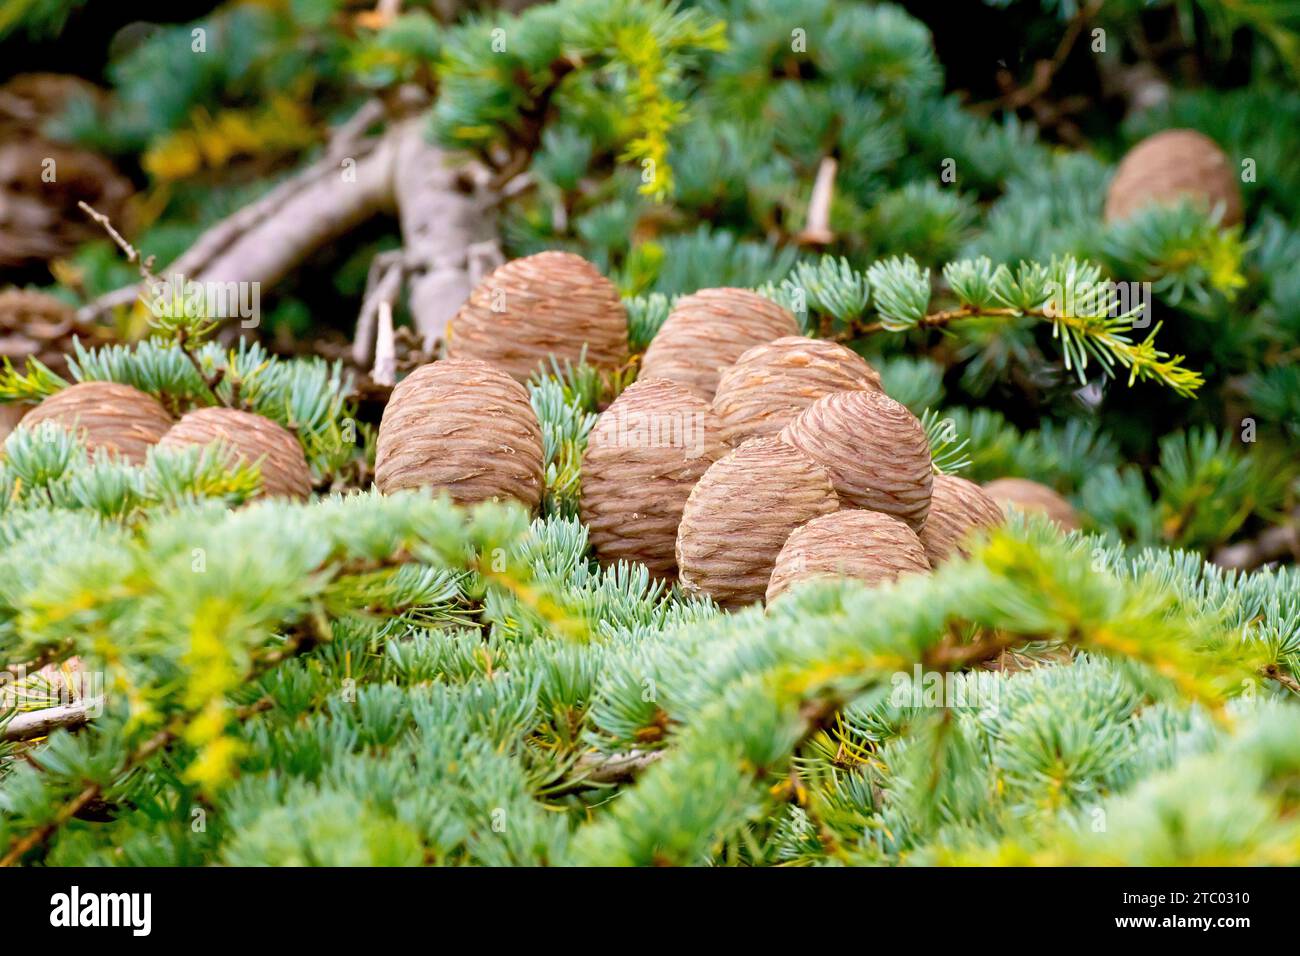 Cedar of Lebanon (cedrus libani), close up showing ripe mature cones standing upright on a branch of the introduced tree. Stock Photo